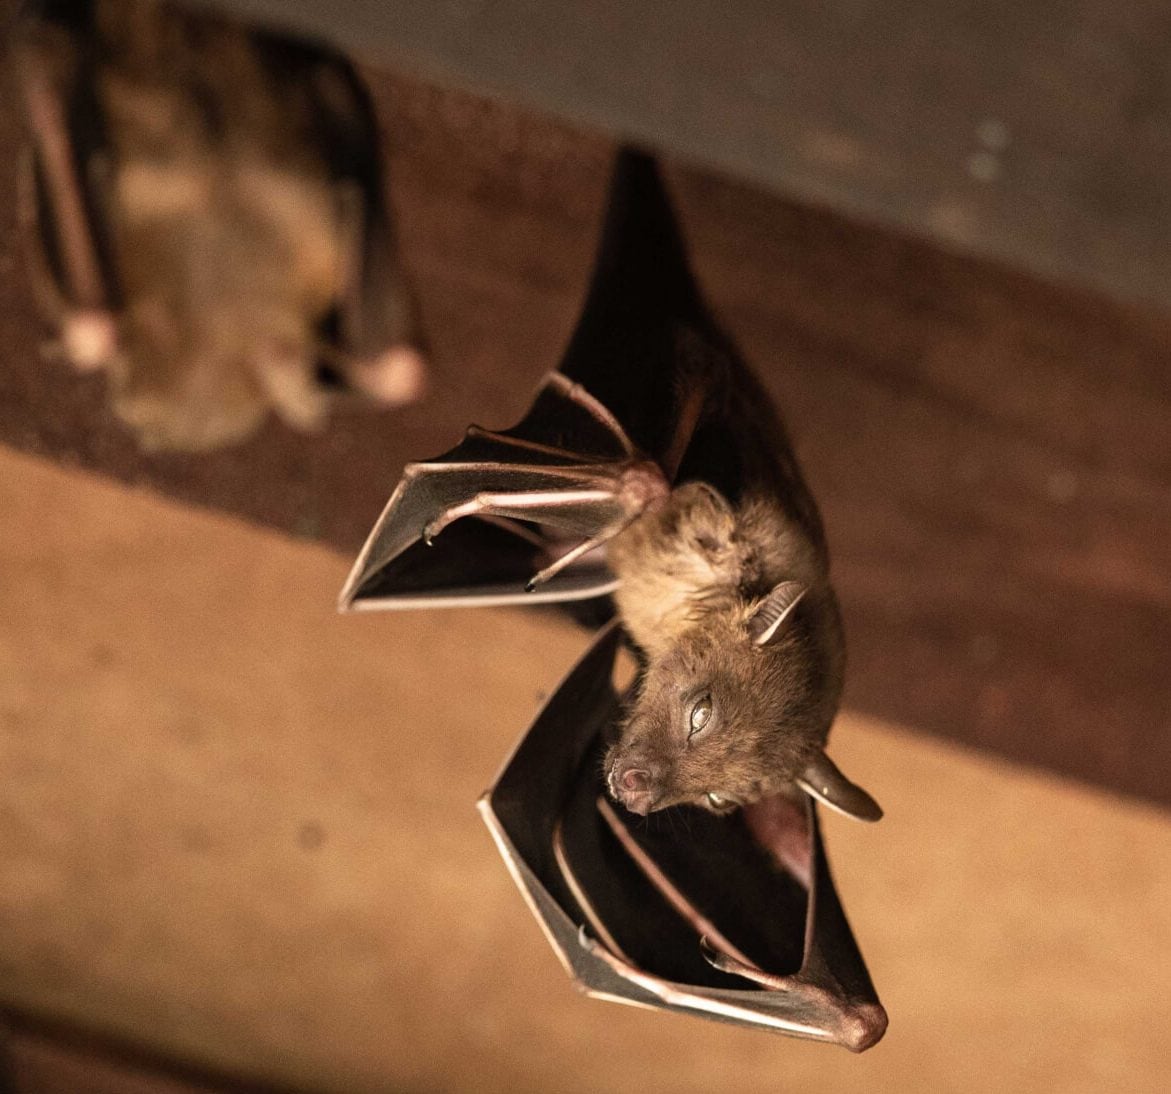 Bat removal services from wildlife removal experts in Evansville, Indiana